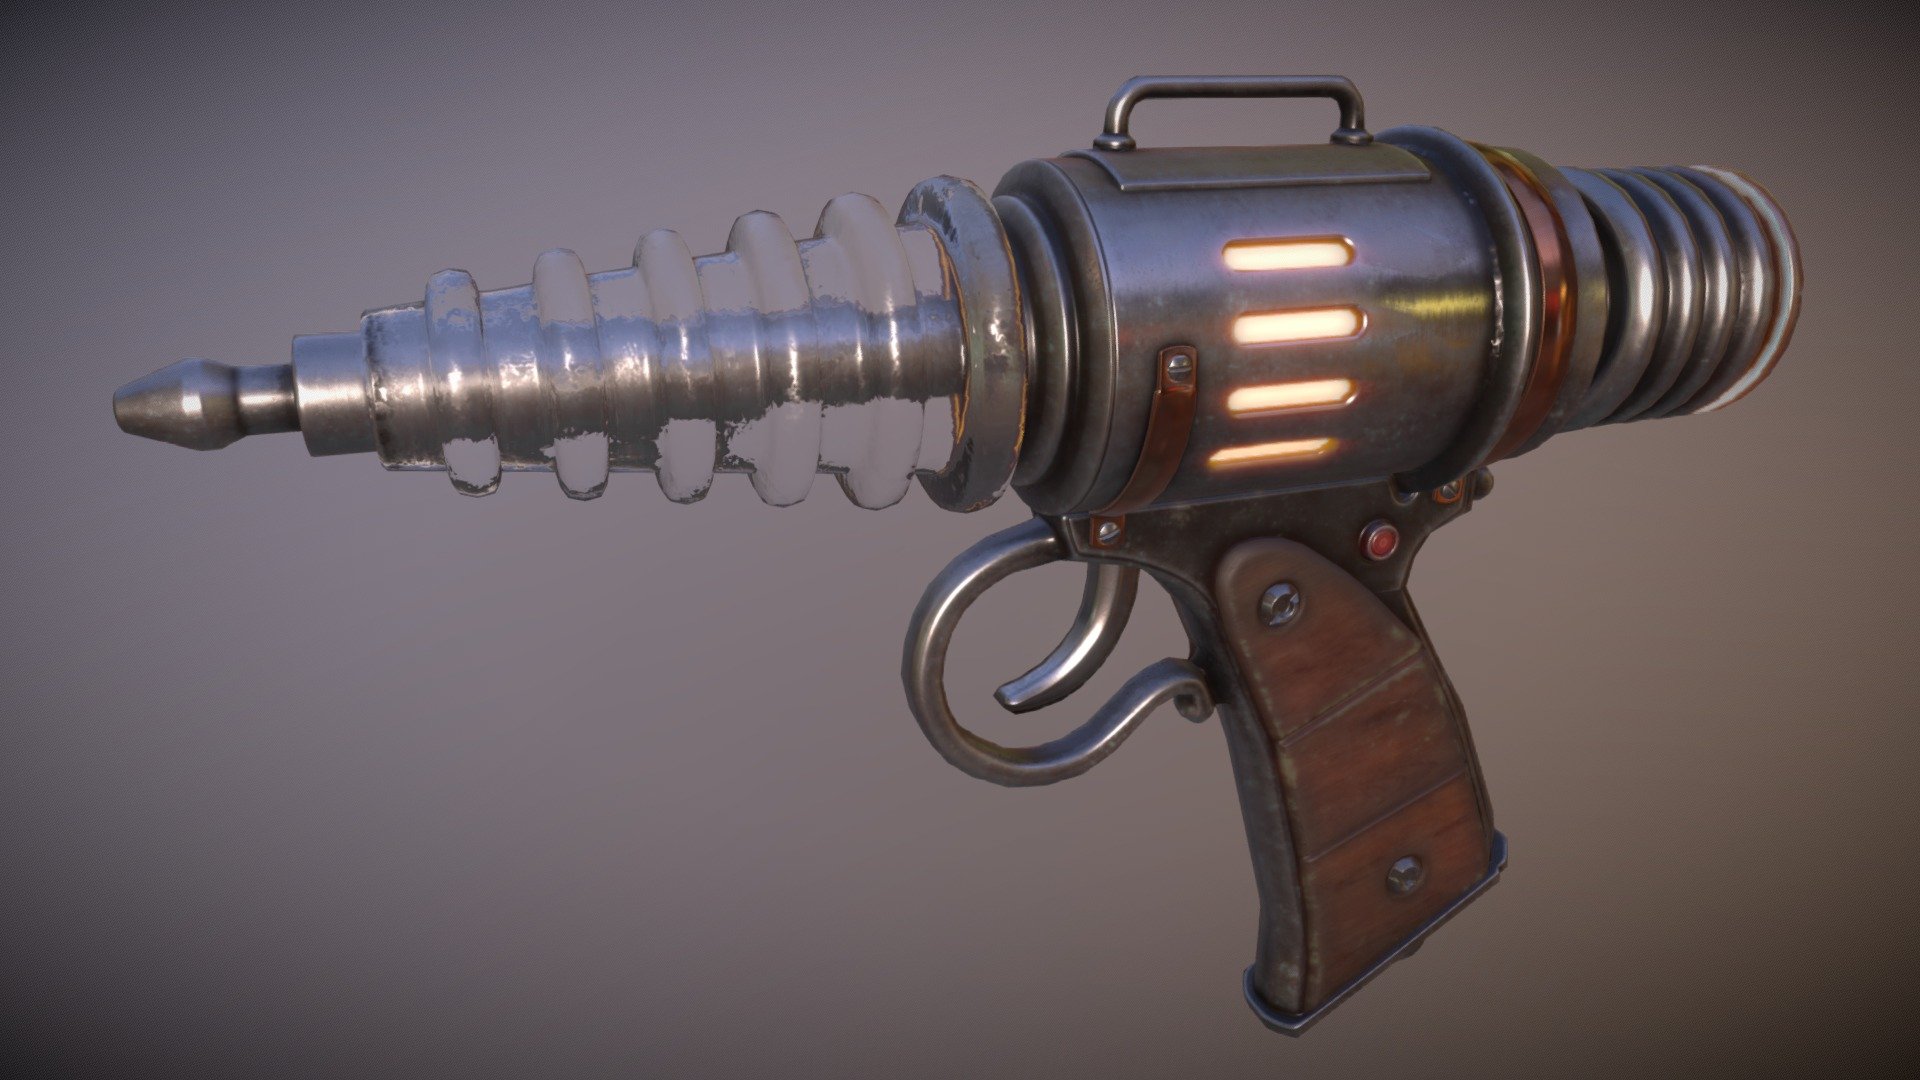 This is a Ray Gun I made for my class at Edinburgh College. We were asked to produce a weapon with a Retro-Futuristic style.

After initially completing the Gold Variant, I decided to create an additional skin with a different colour scheme. I had a lot of fun creating this small &amp; self-contained piece. I hope to continue expanding upon and improving it in the near-future.

Mesh was created with Blender 2.79. 
Marmoset Toolbag 3.04 and Substance Painter 2018 were used for Baking &amp; Texturing.

Be sure to follow me on ArtStation! - Retro-Futuristic Ray Gun - 3D model by WJS 3d model